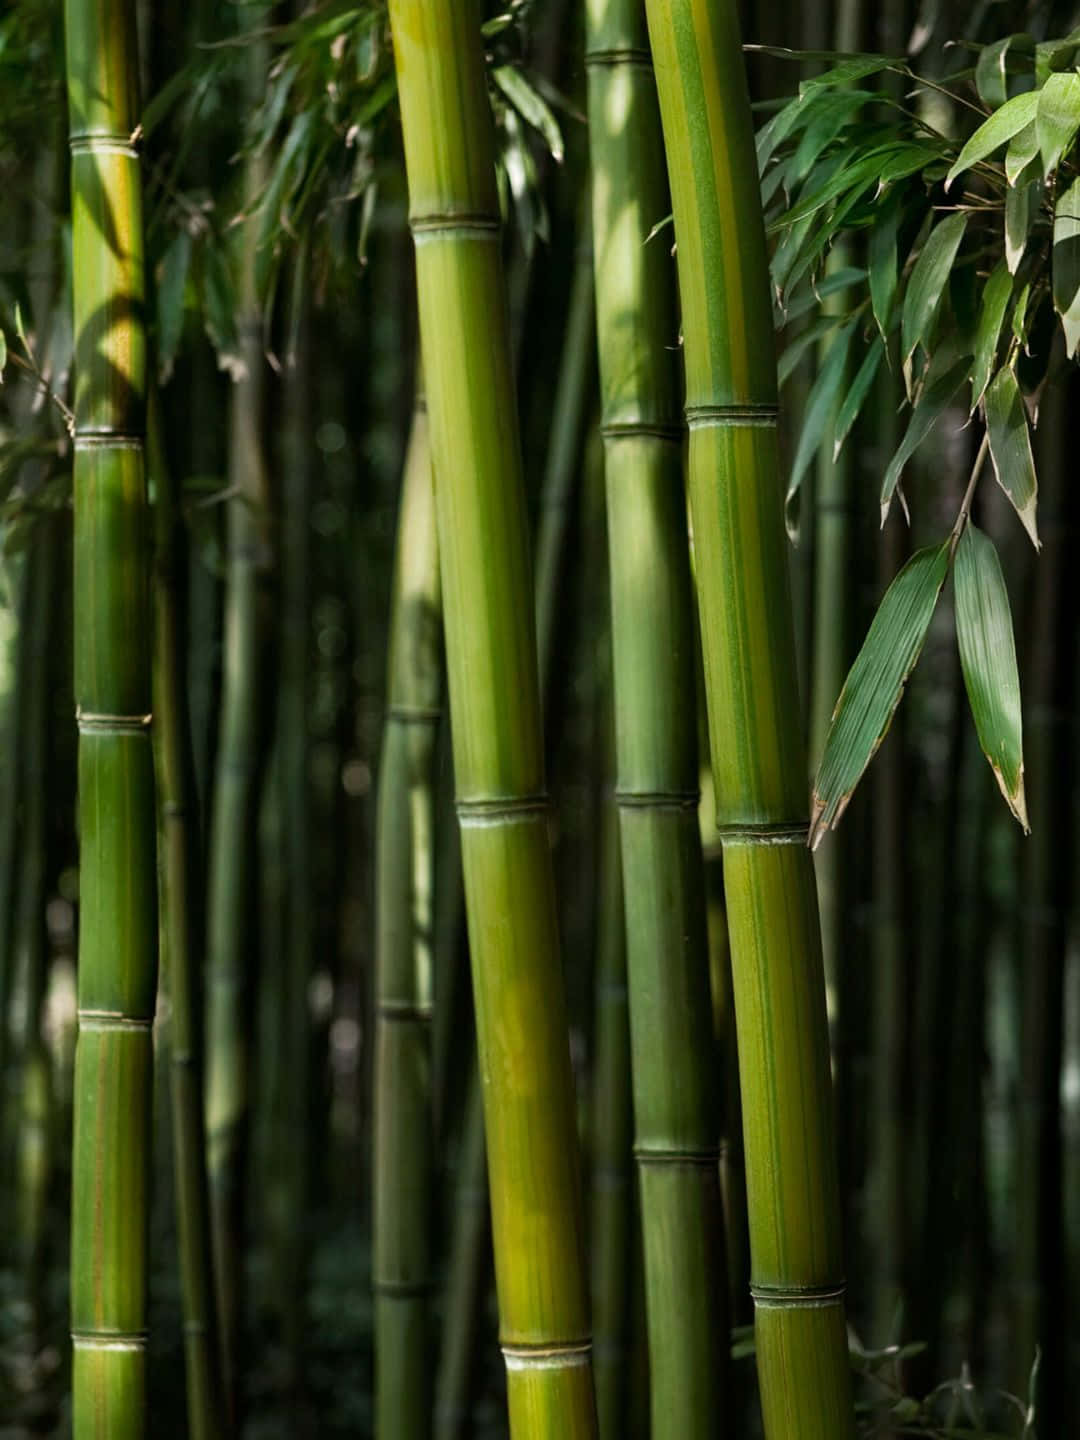 1440p Bamboo Background Very Dark Green Stems And Leaves